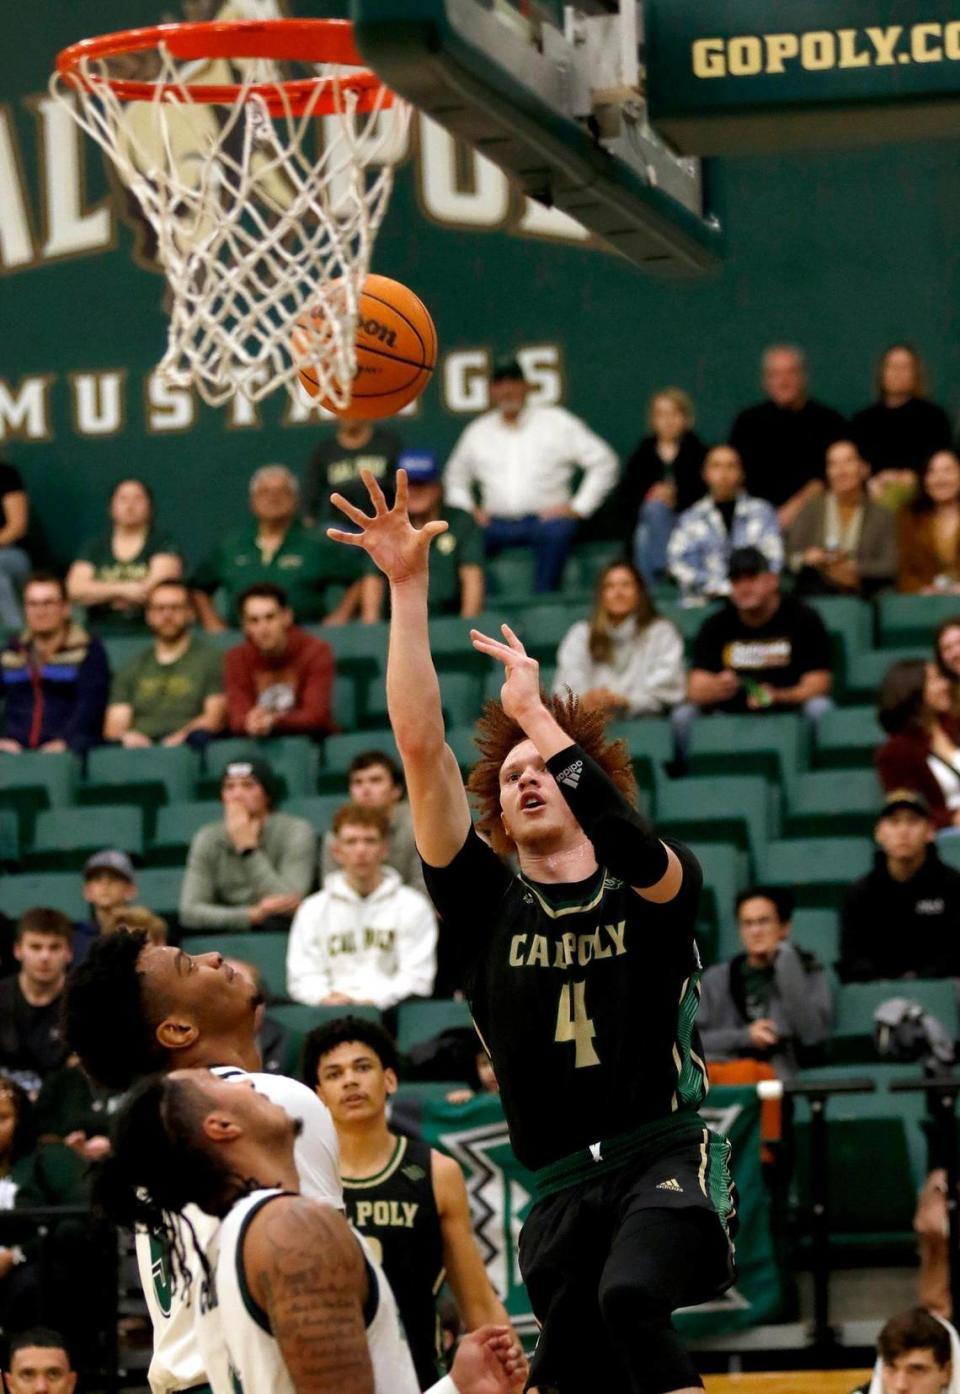 Cal Poly’s Brantly Stevenson is one of the key losses for the Mustangs. The 6’4 guard transfered to Cal Baptist this offseason.